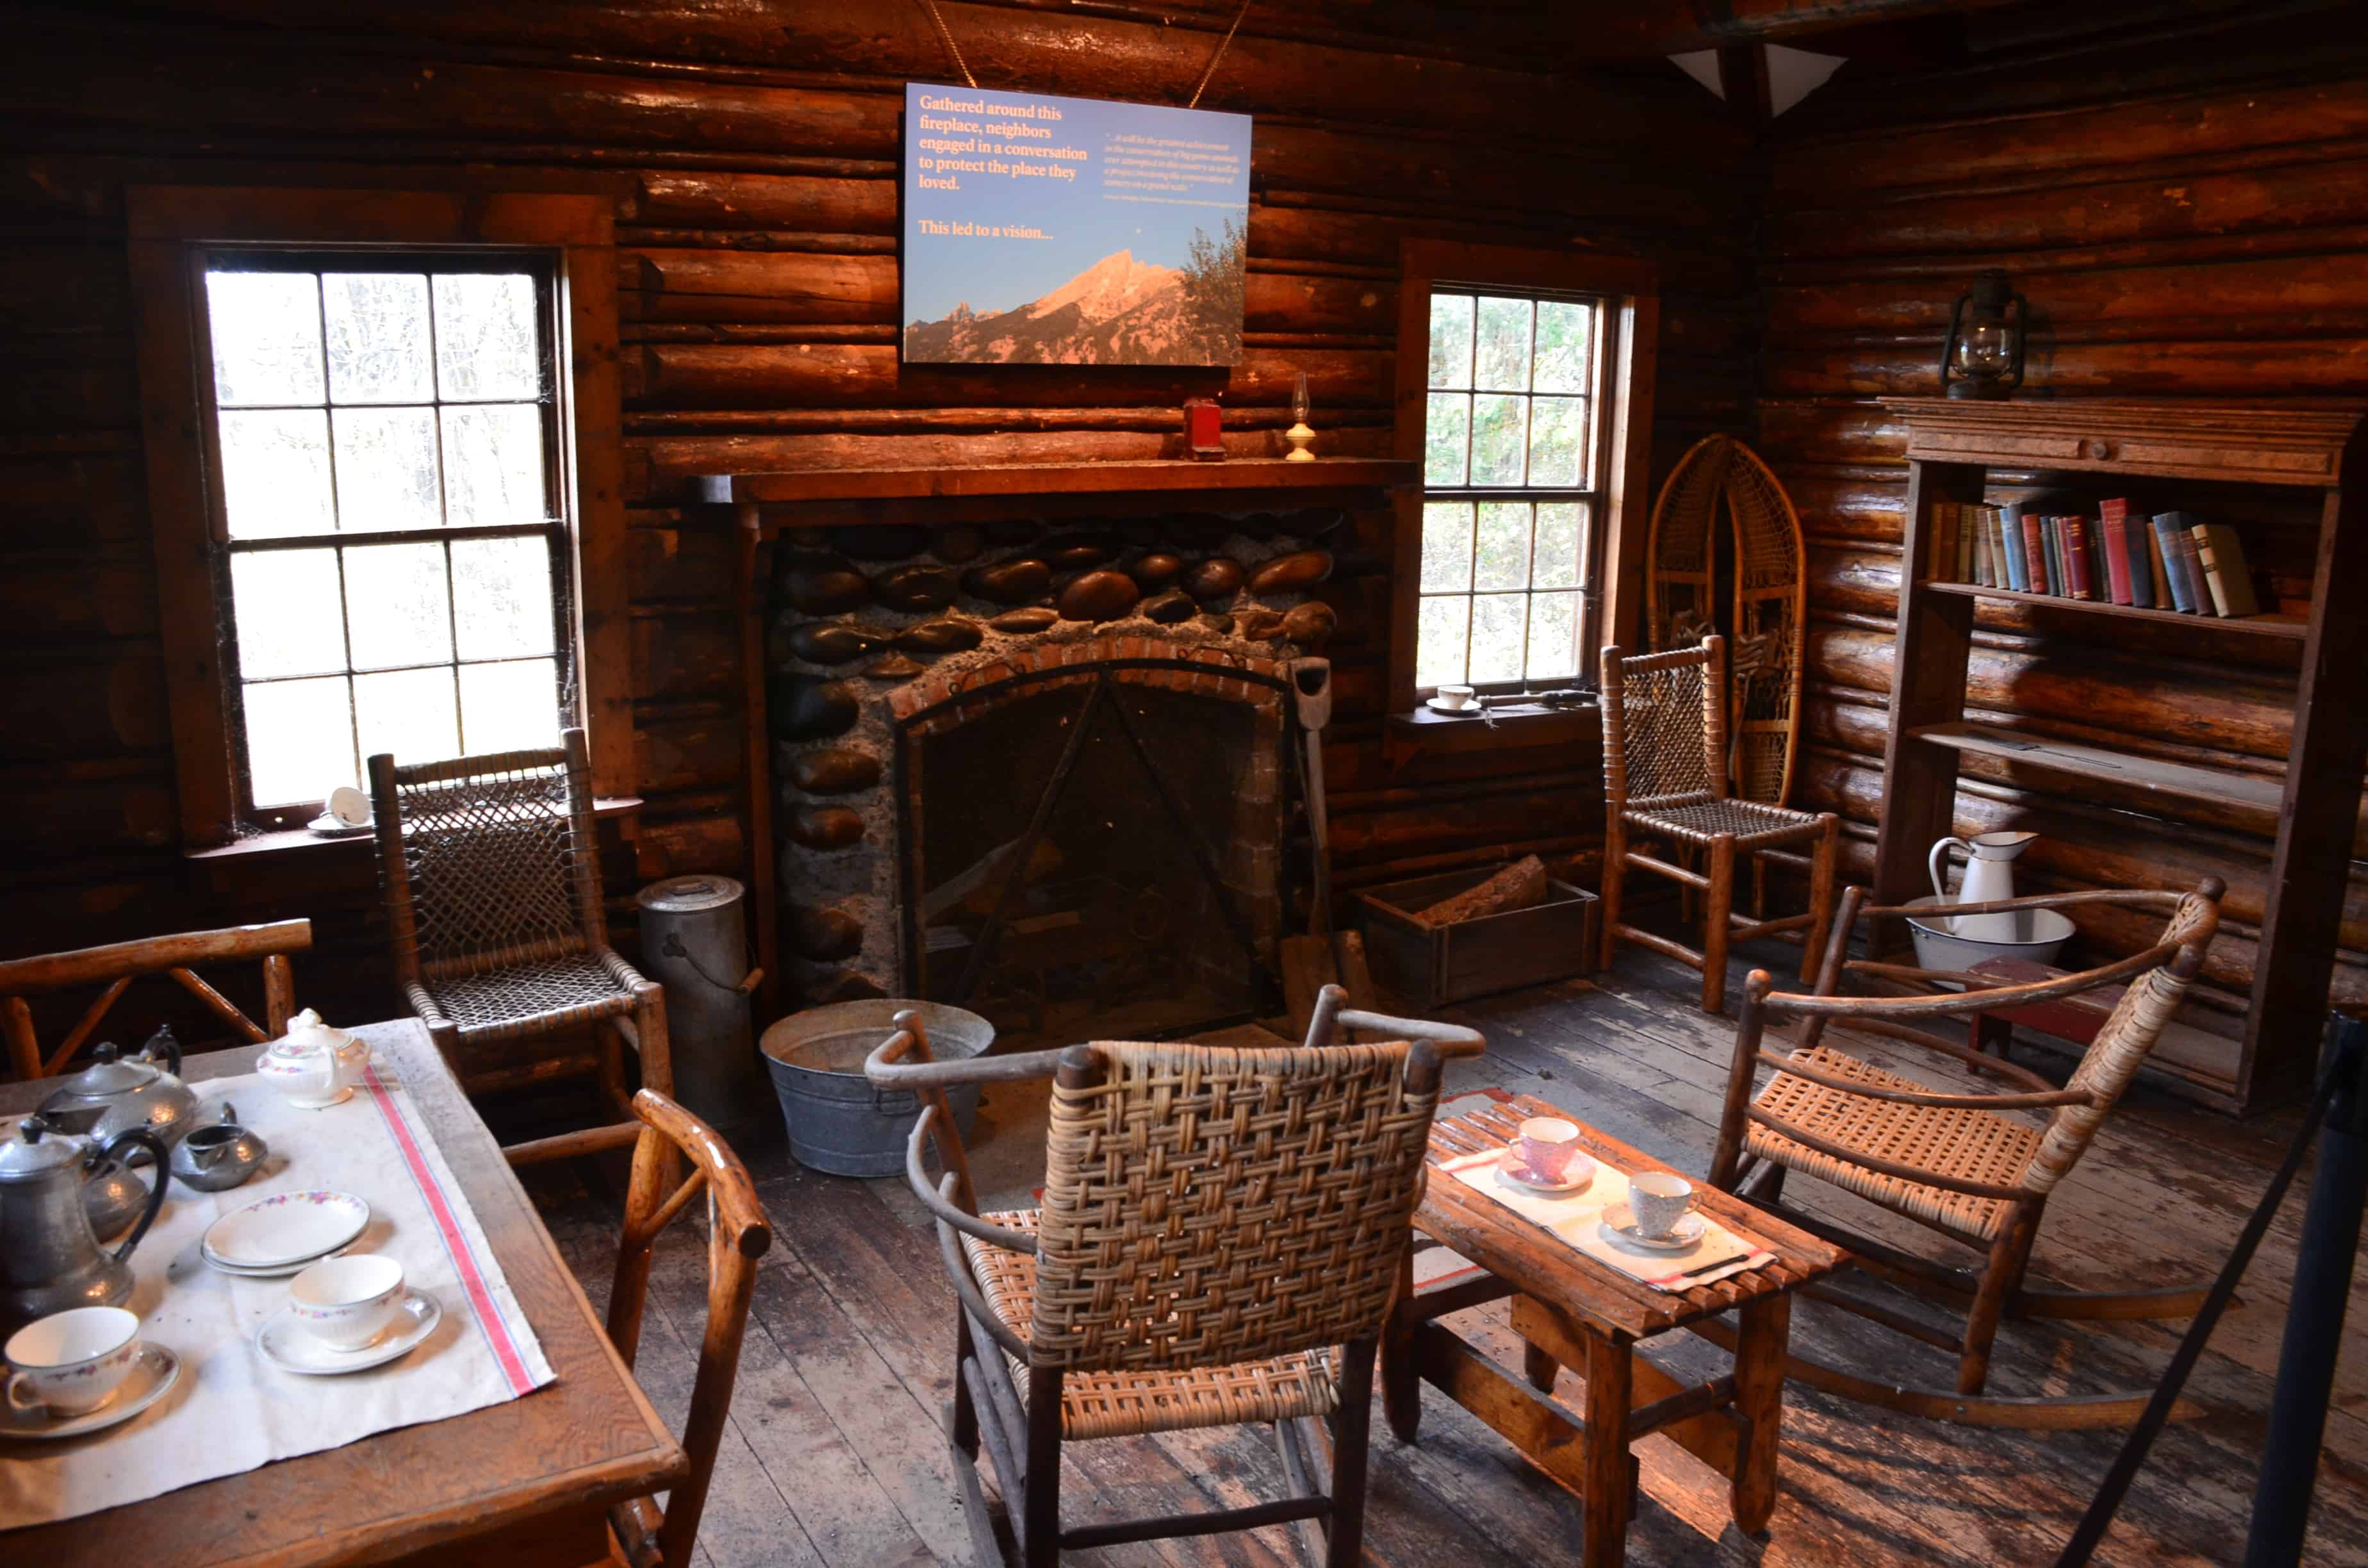 Maude Noble Cabin at Menor's Ferry Historic District in Grand Teton National Park, Wyoming